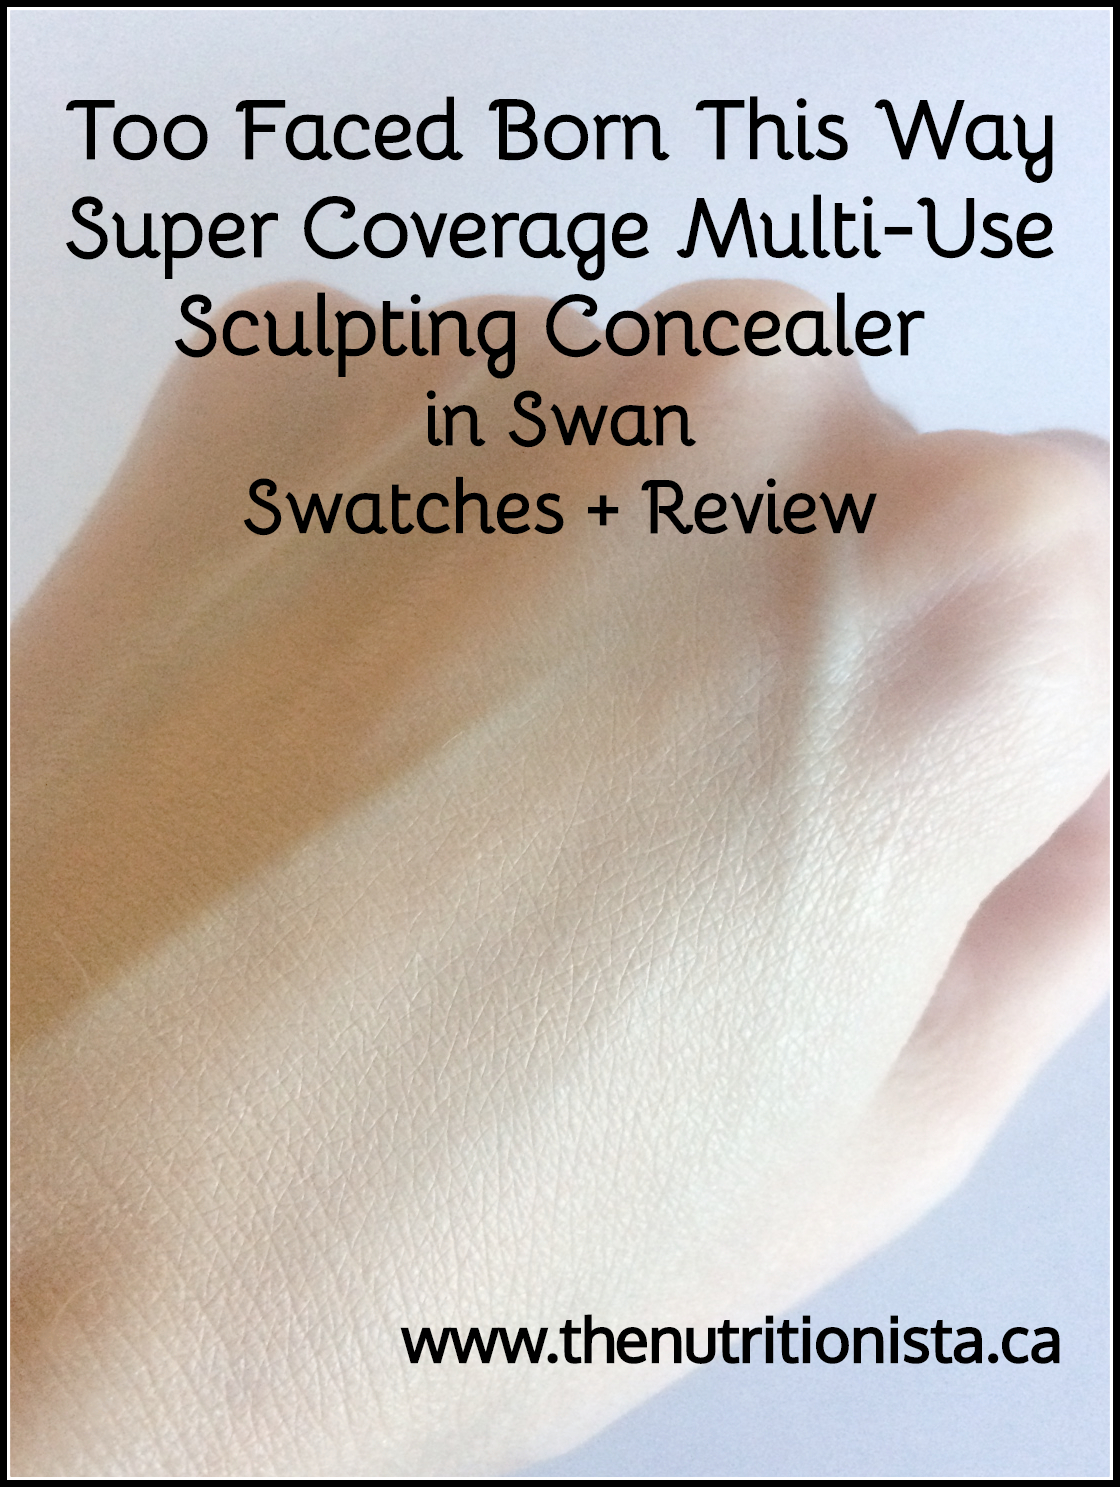 Too Faced Born this Way Super Coverage Multi-Use Sculpting Concealer in Swan Review + Swatches 